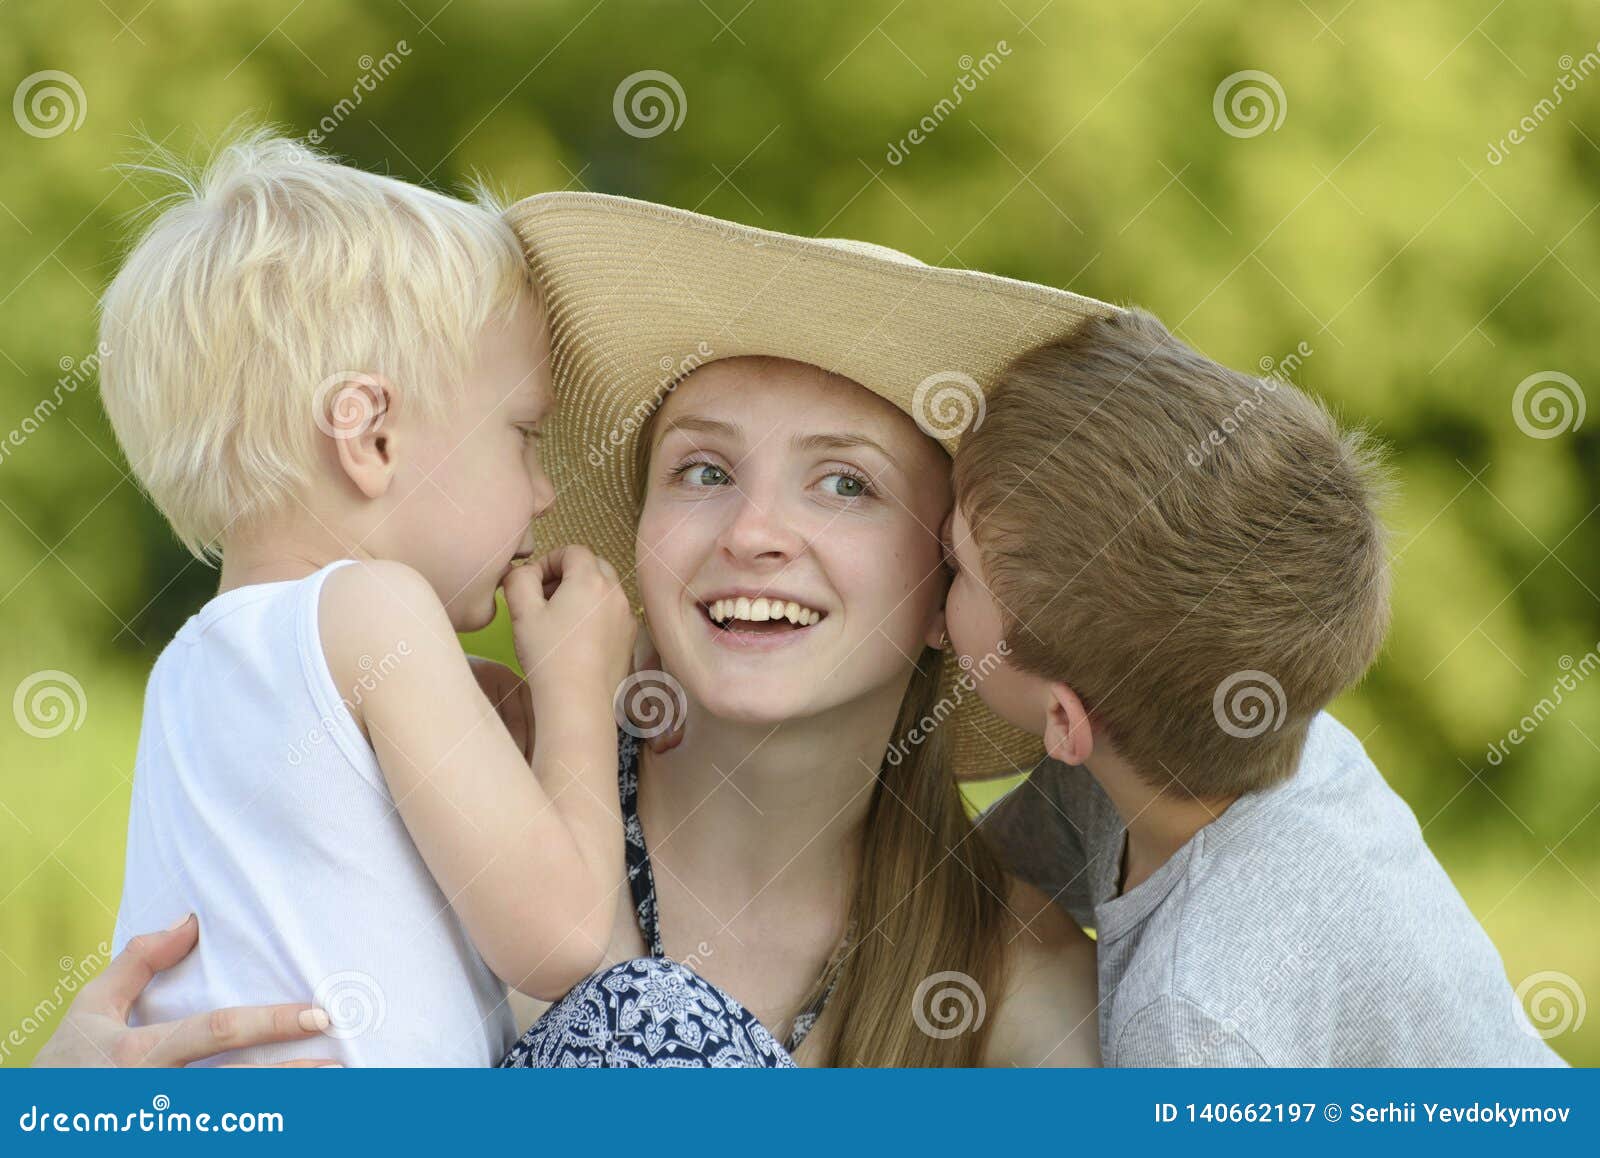 Two Little Sons Hug The Mother And Kiss On The Cheek Against The